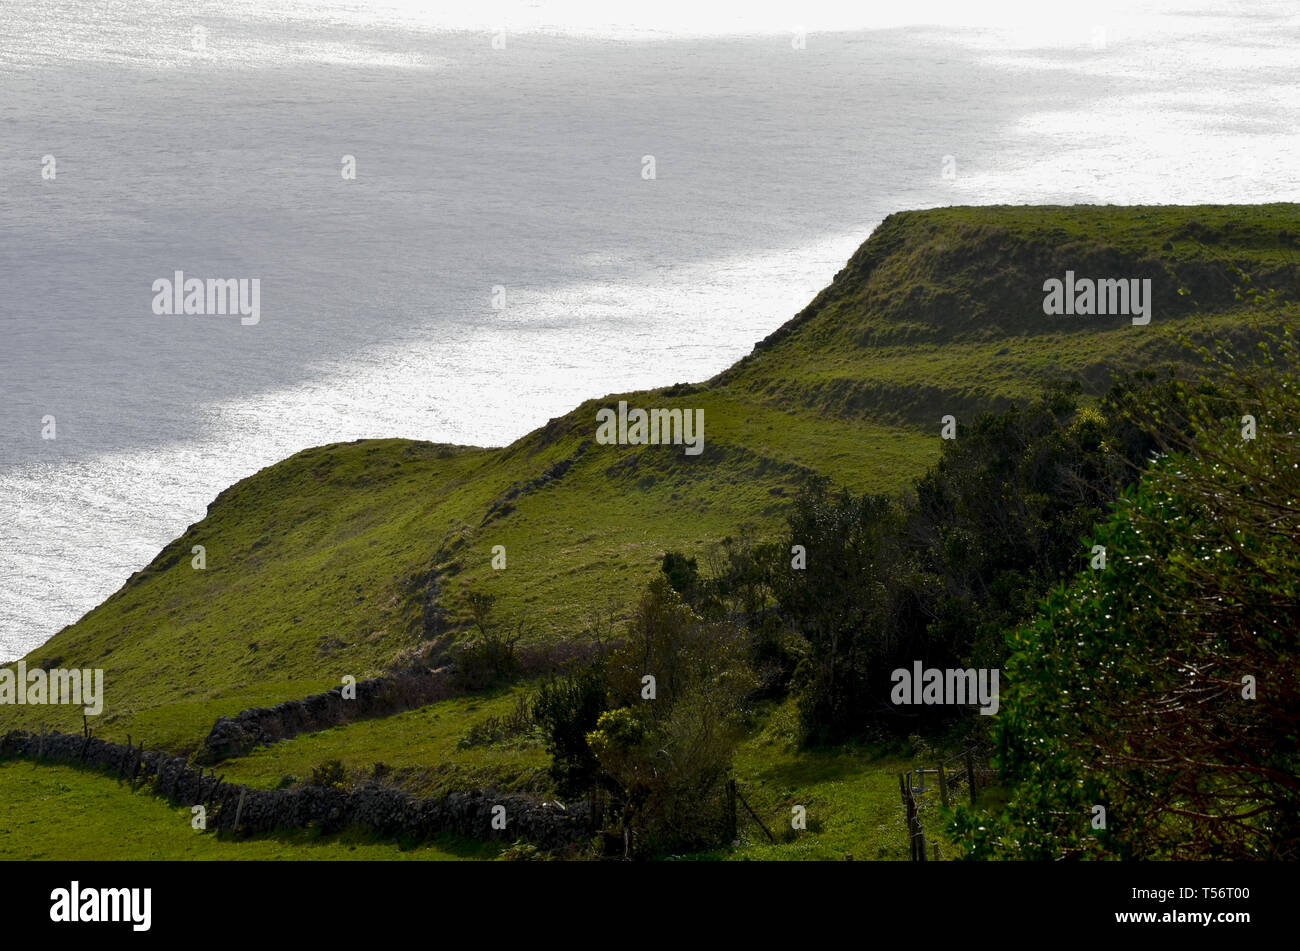 Pastures and rural landscapes in Malbusca, a small parish in the island of Santa Maria, Azores archipelago Stock Photo